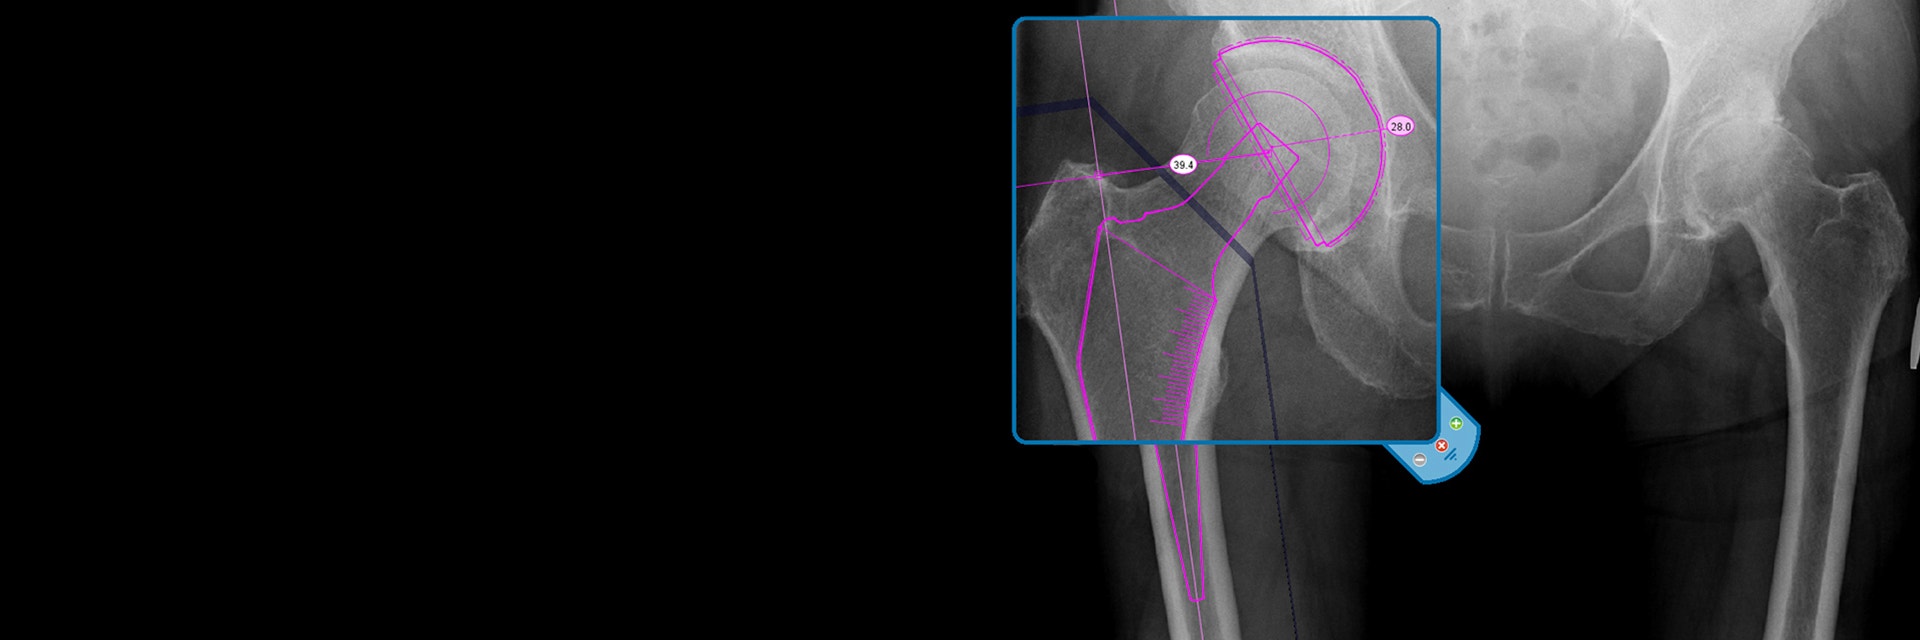 Screenshot image of hip joint templating tool on OrthoView 